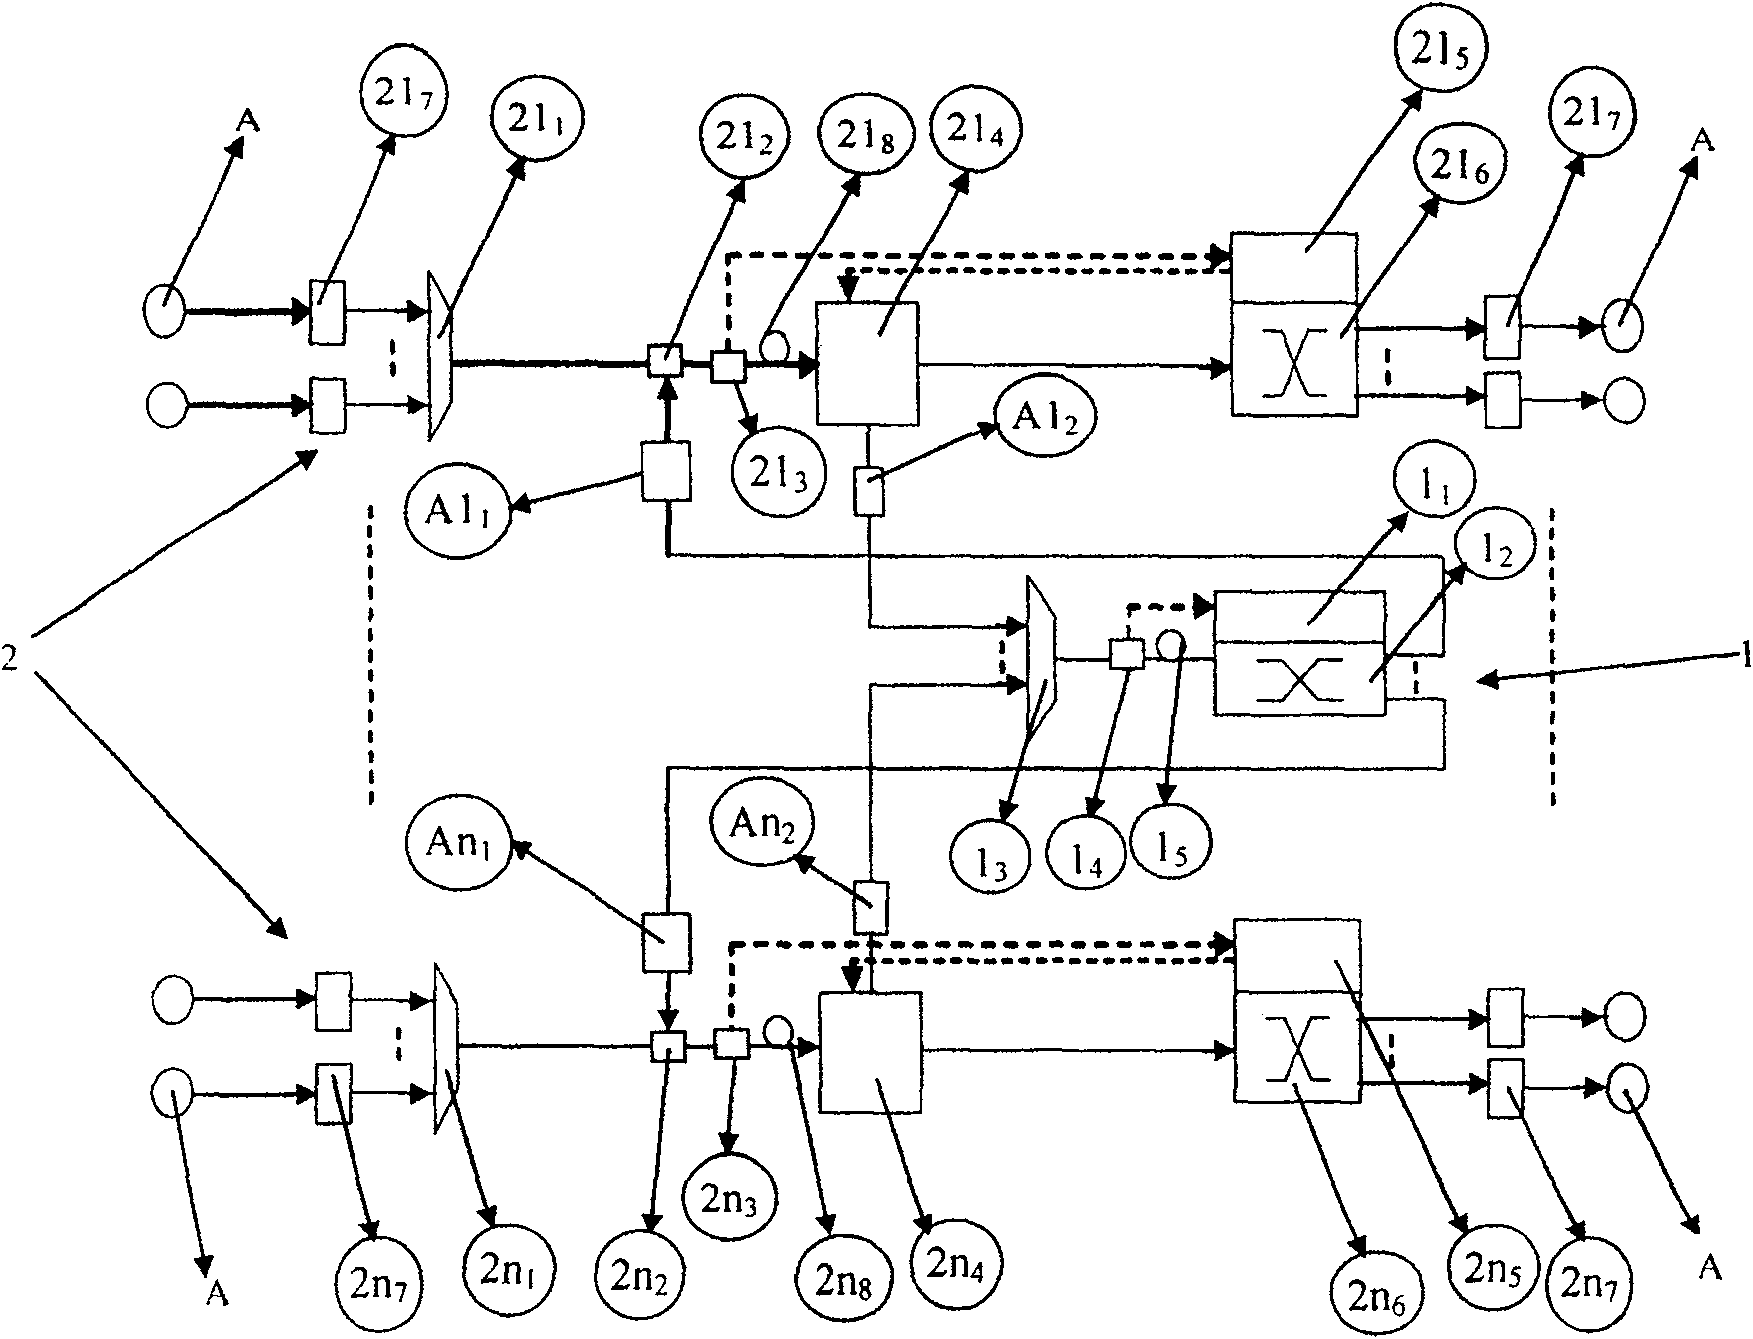 Graded control computer system based on optical packet switch and optical multicast